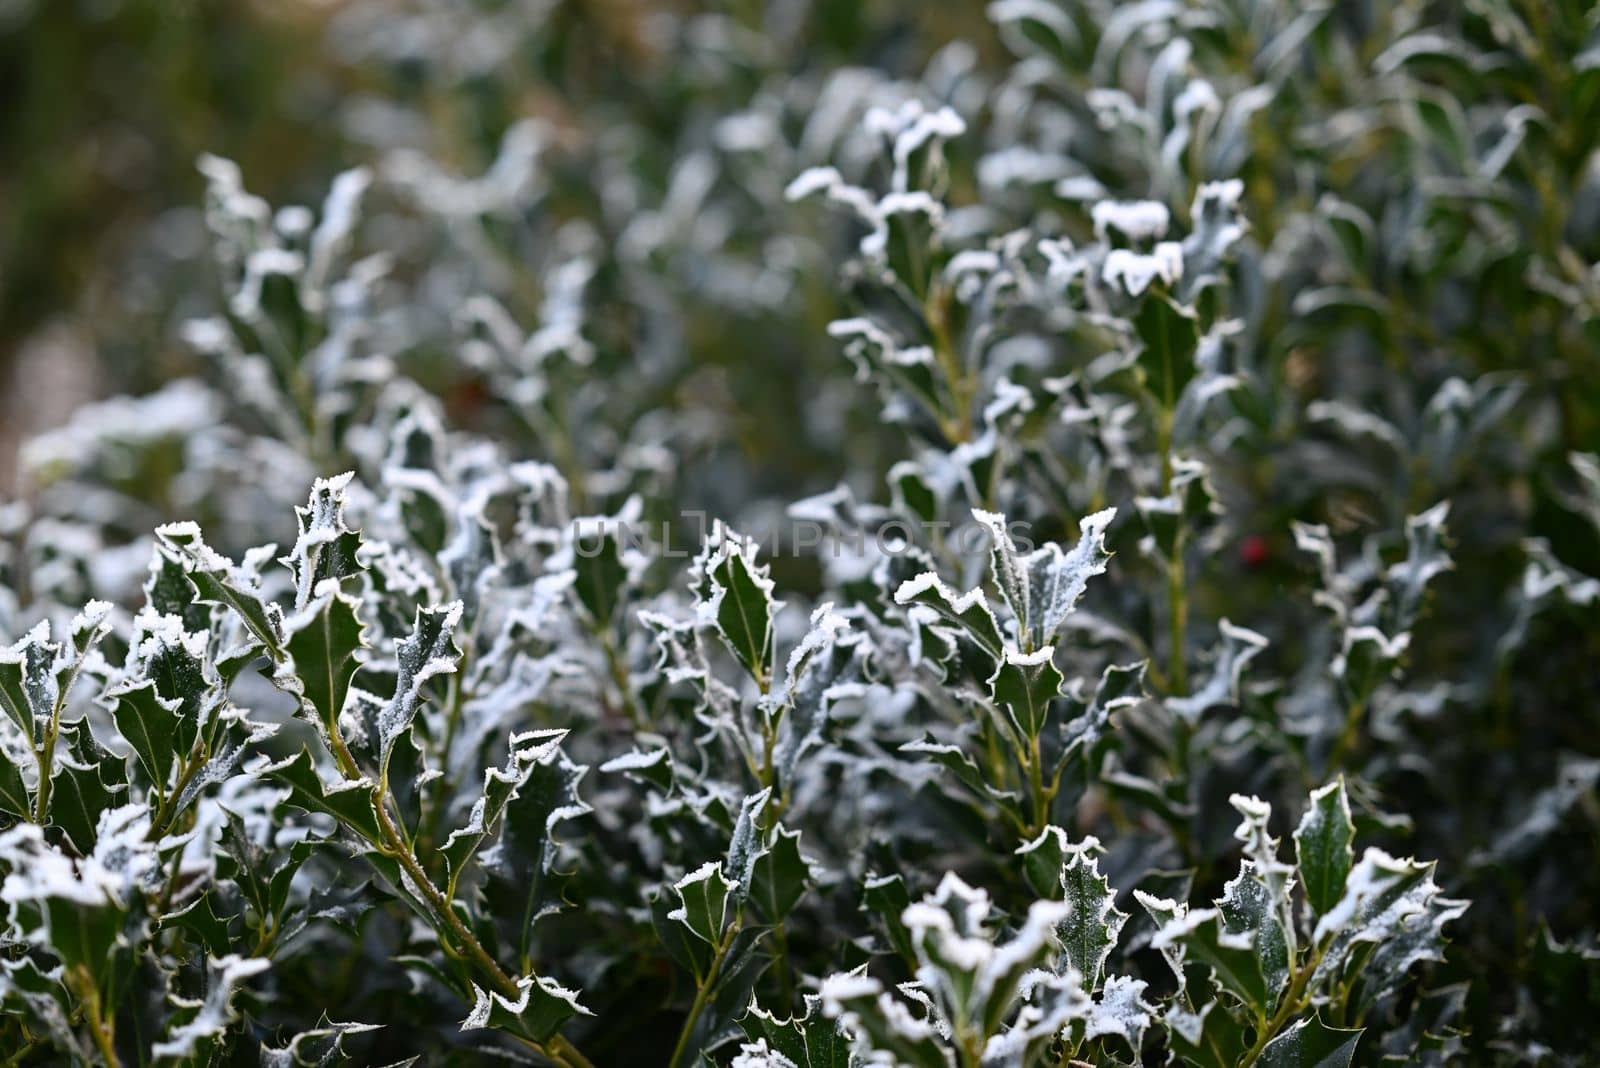 Ilex hedge with hoarfrost as a close up by Luise123